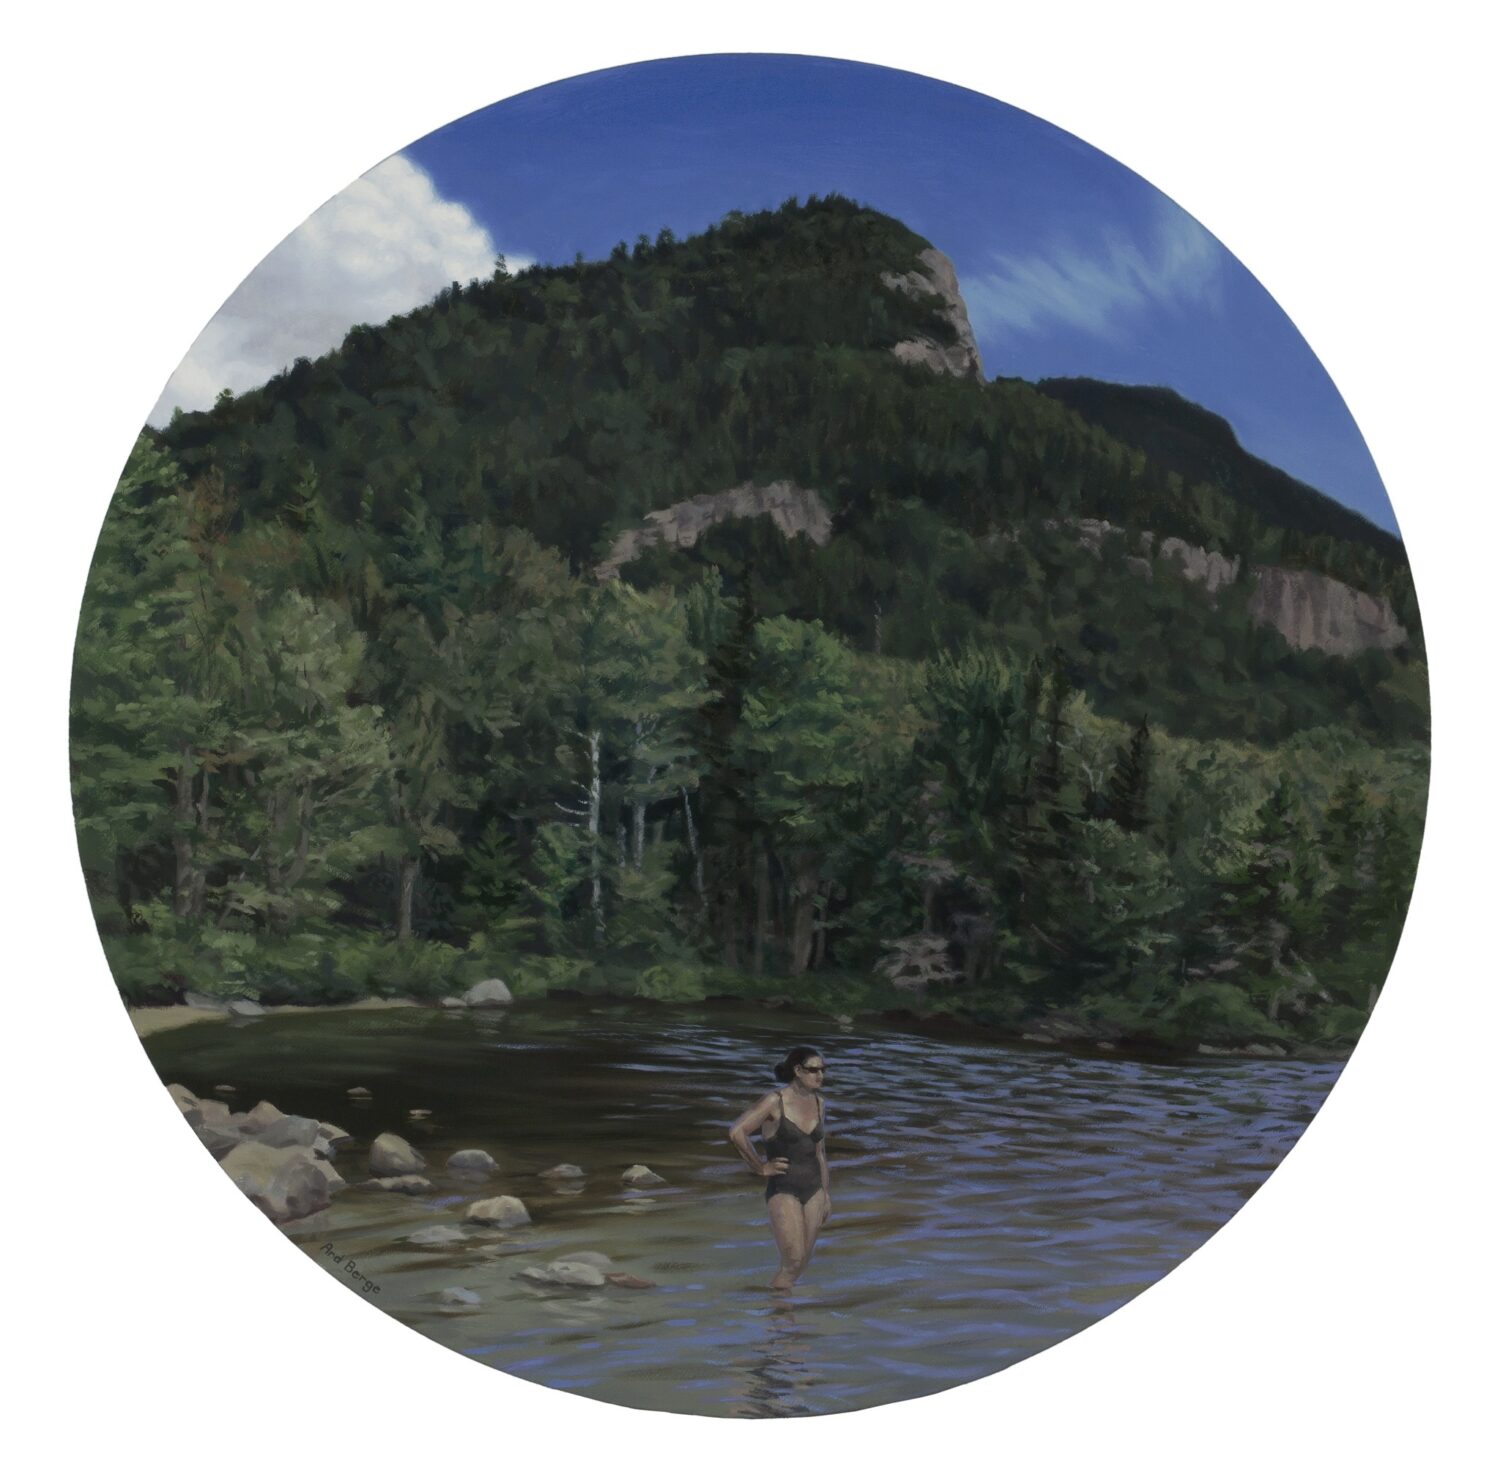 thumbnail of Oil on linen by Ard Berge titled Echo Lake.